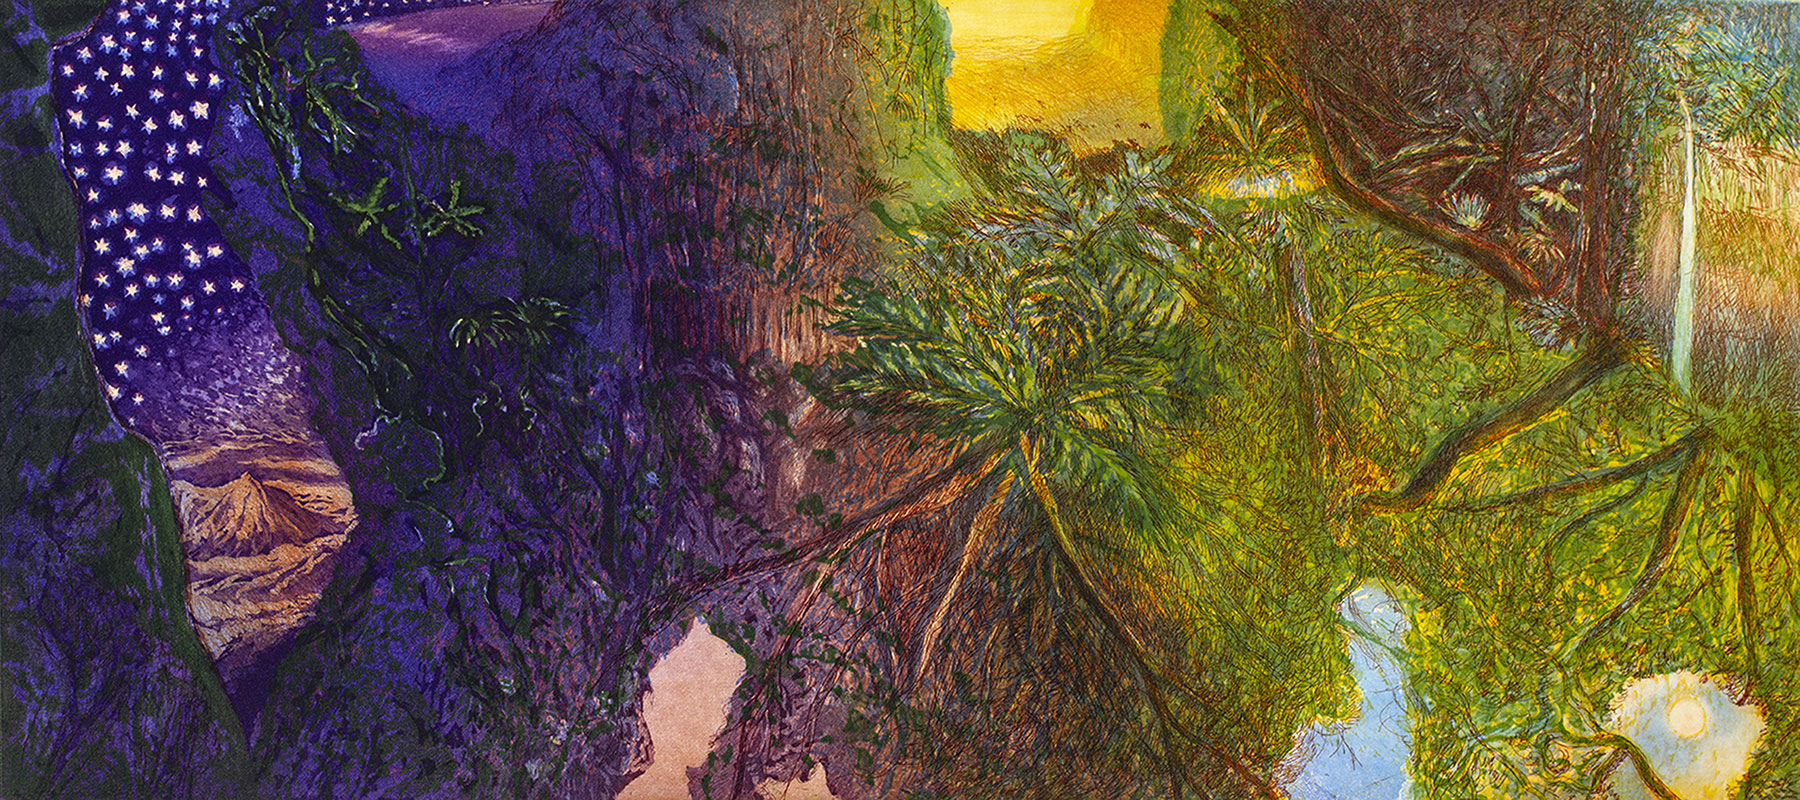 William ROBINSON  Springbrook merging towards night 2004   colour etching   QUT Art Collection   Donated under the Australian Government's Cultural Gifts Program by William Robinson, 2018